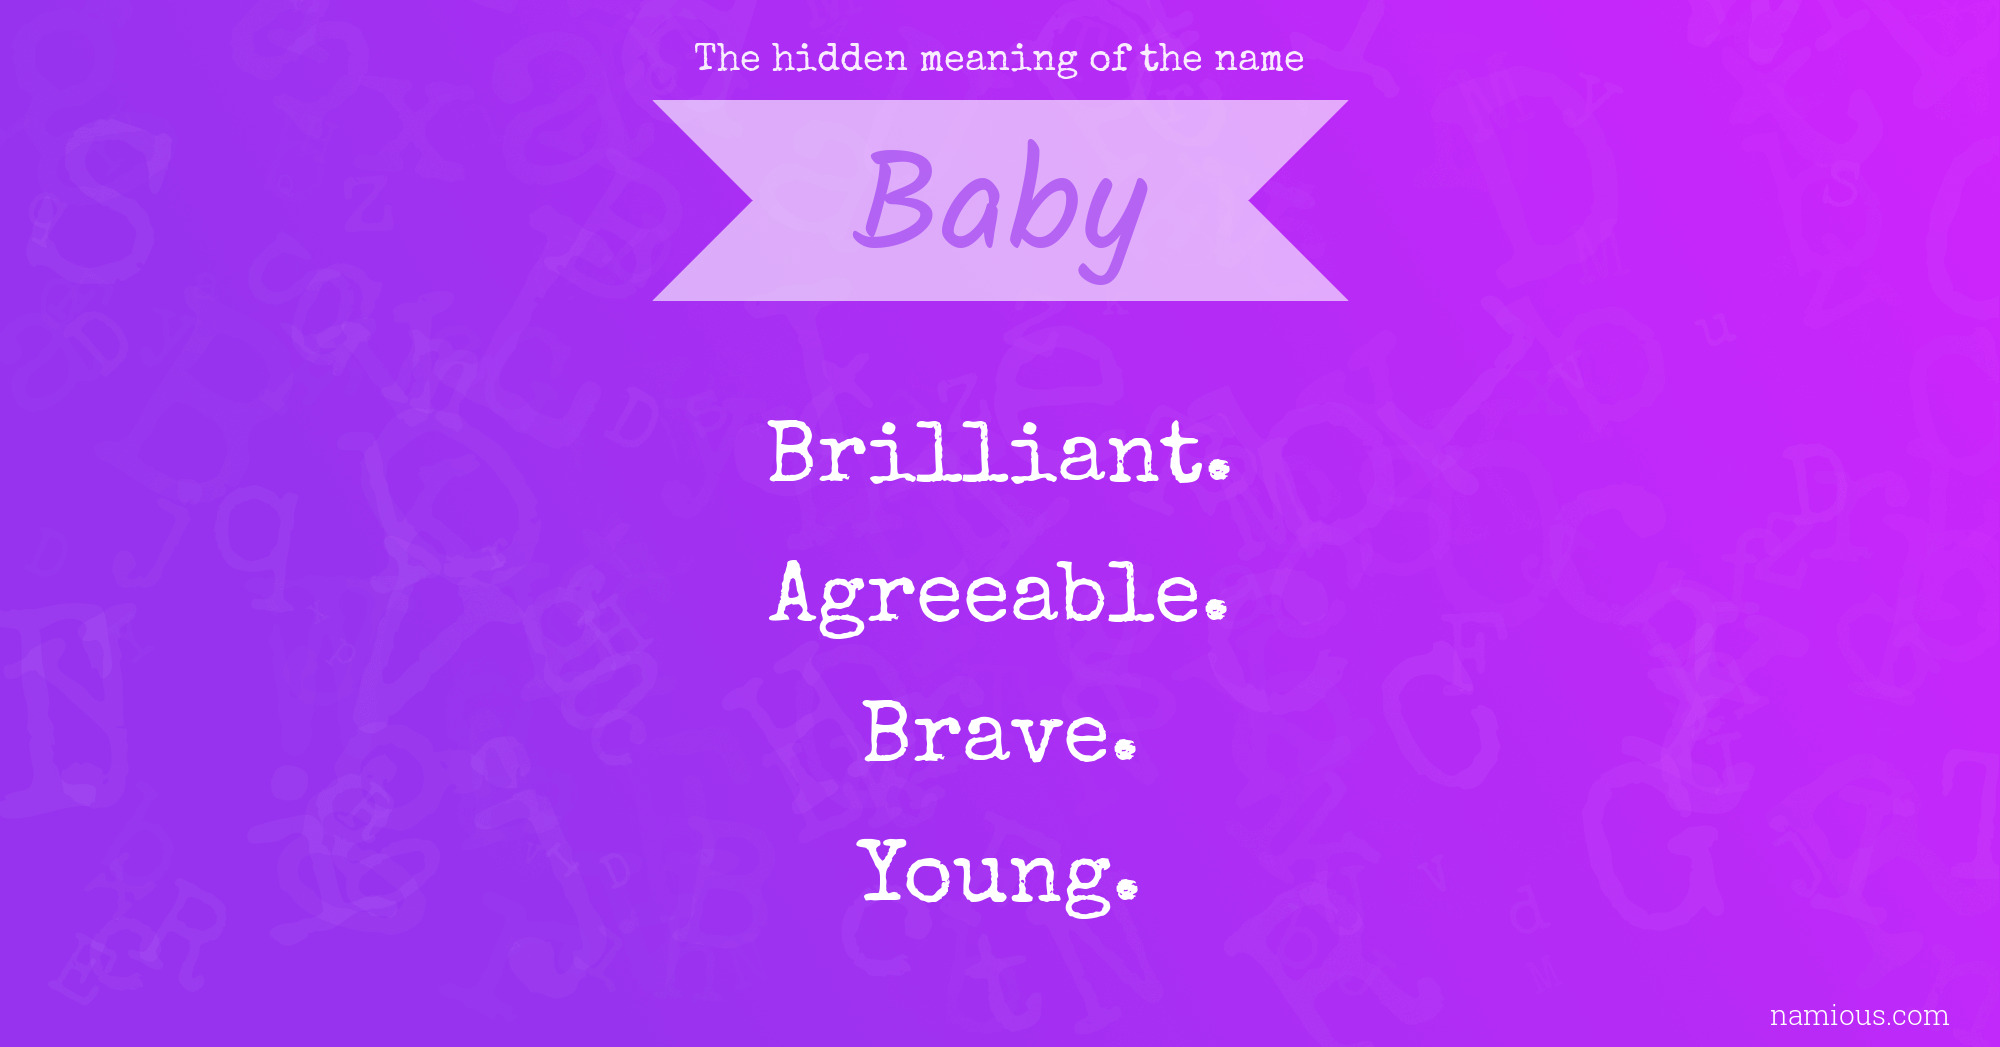 The hidden meaning of the name Baby